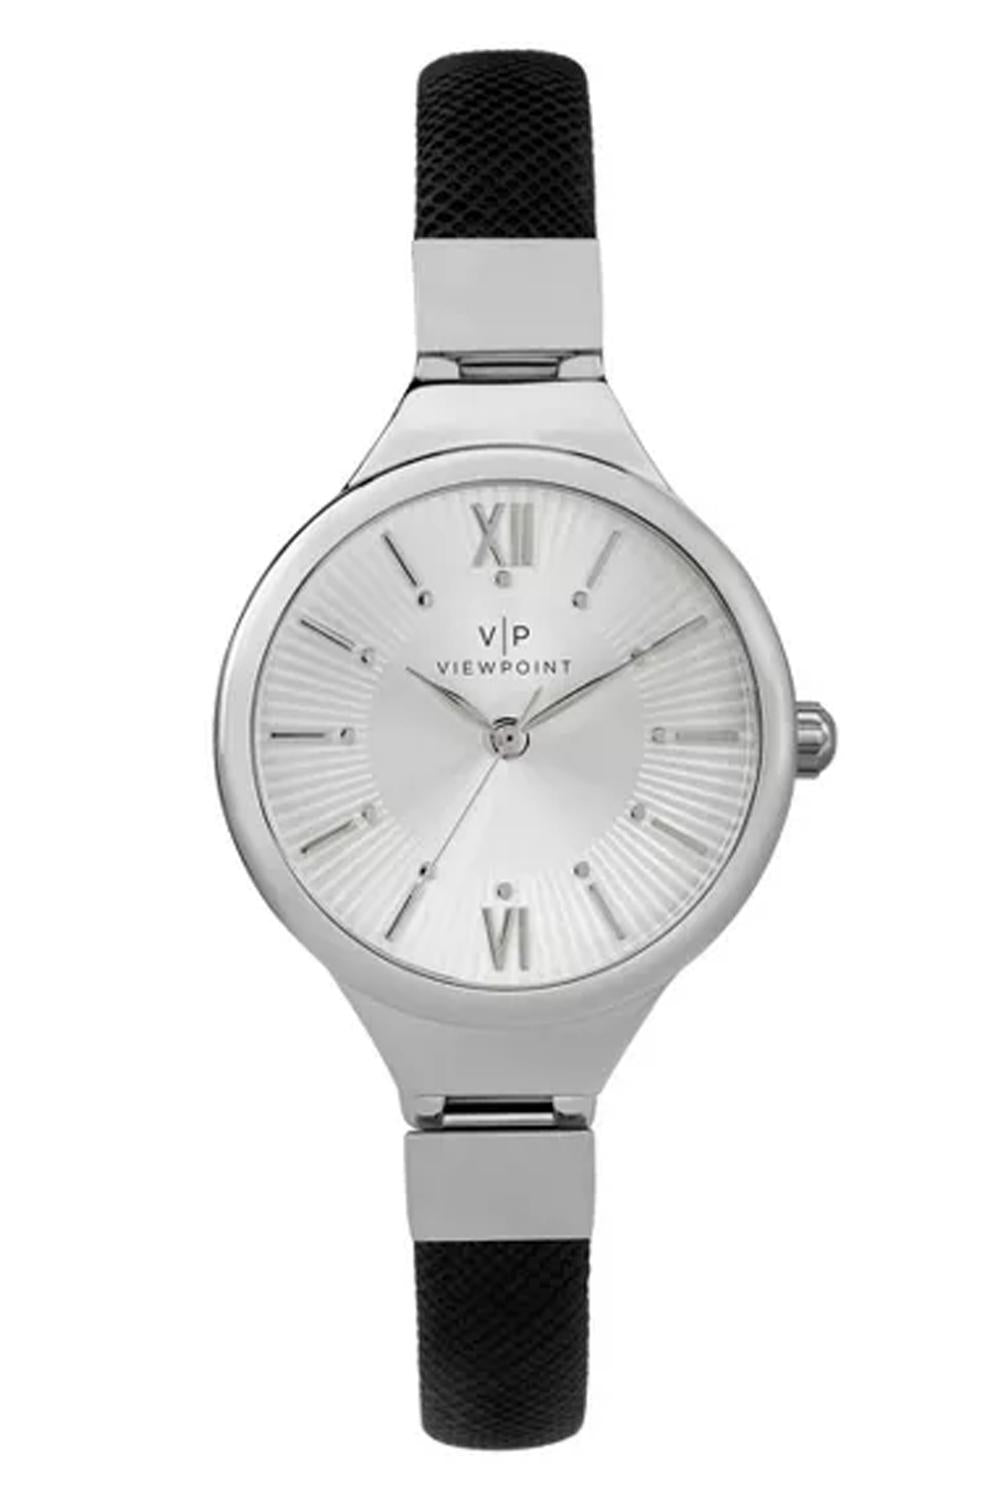 Timex Women's Viewpoint Watch With Faux Leather Strap, Silver, Black